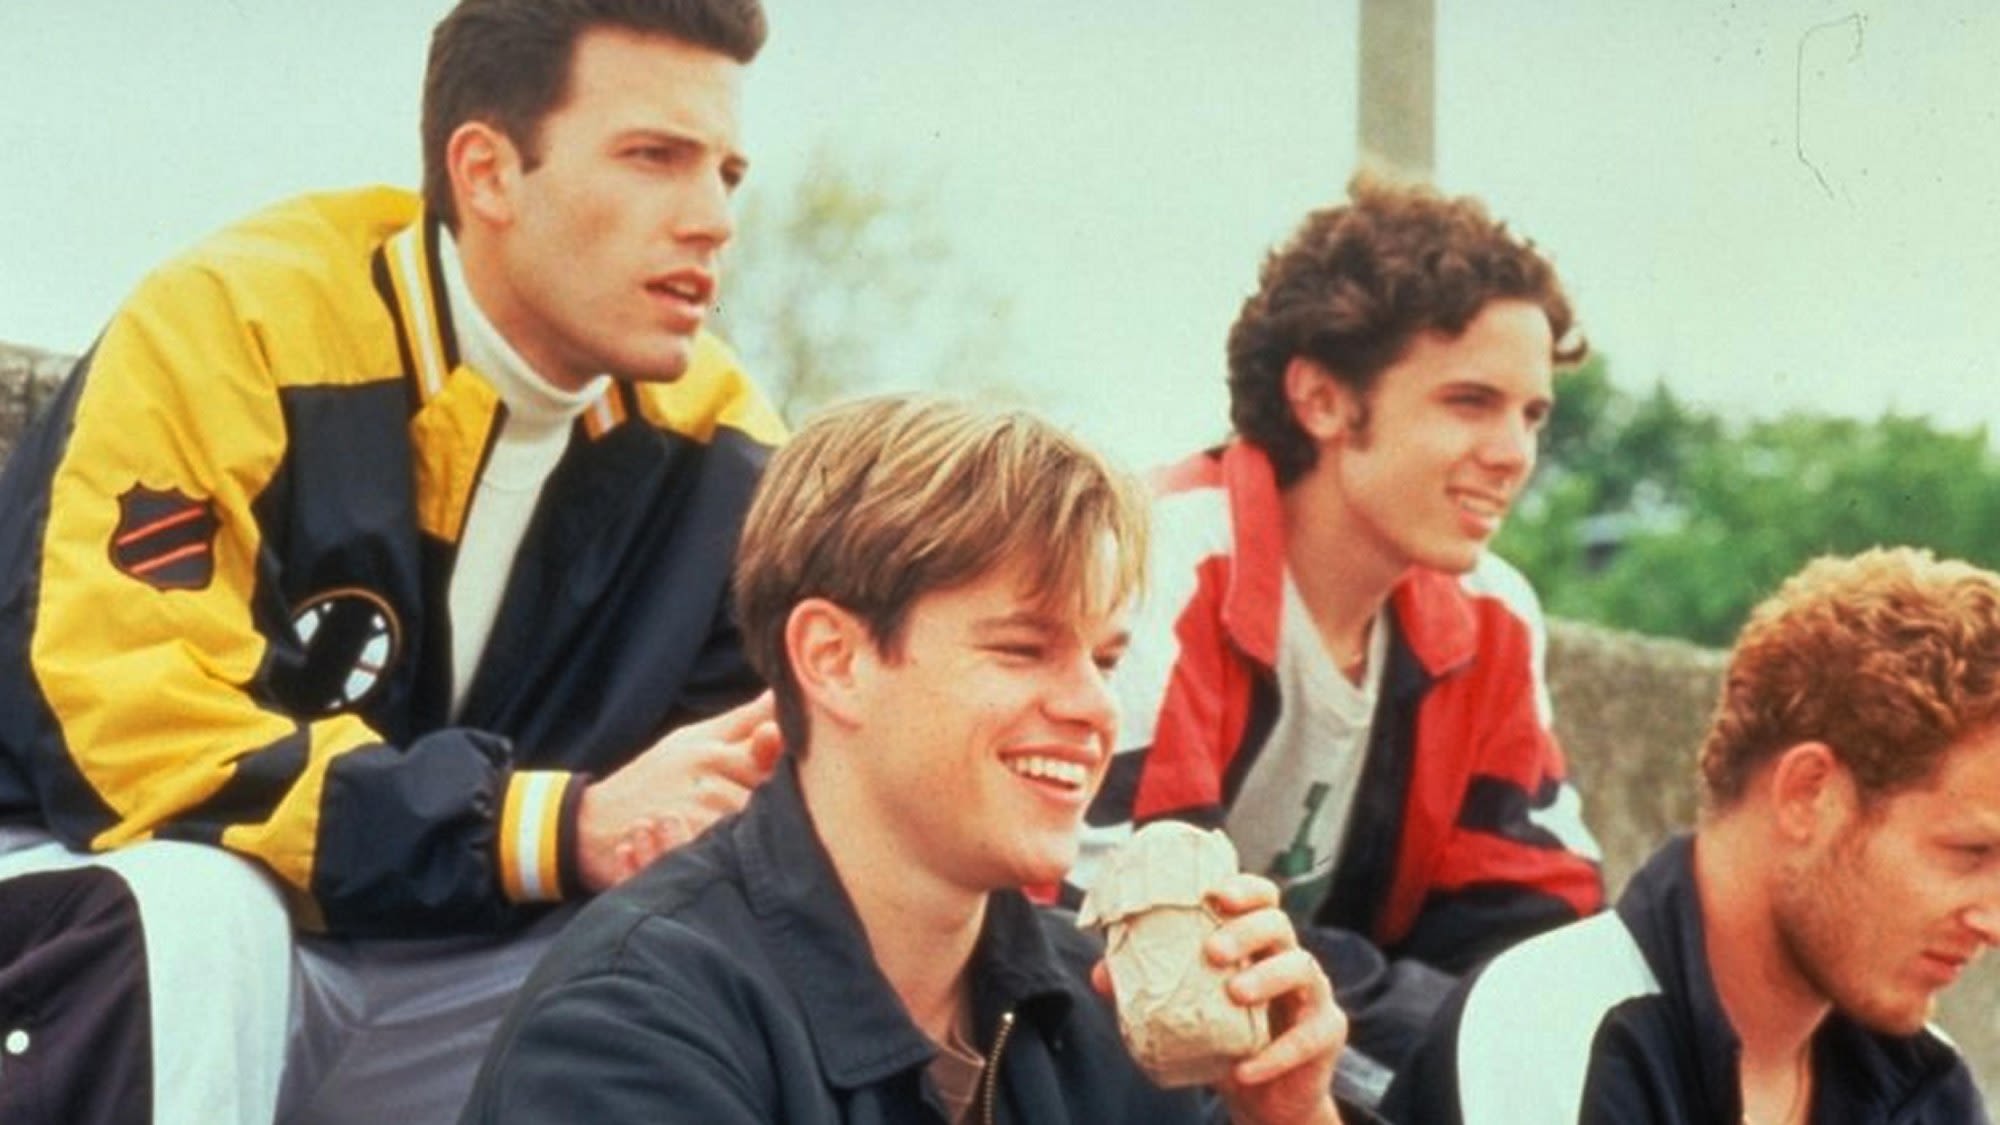 7 best movies like 'Good Will Hunting' to stream now